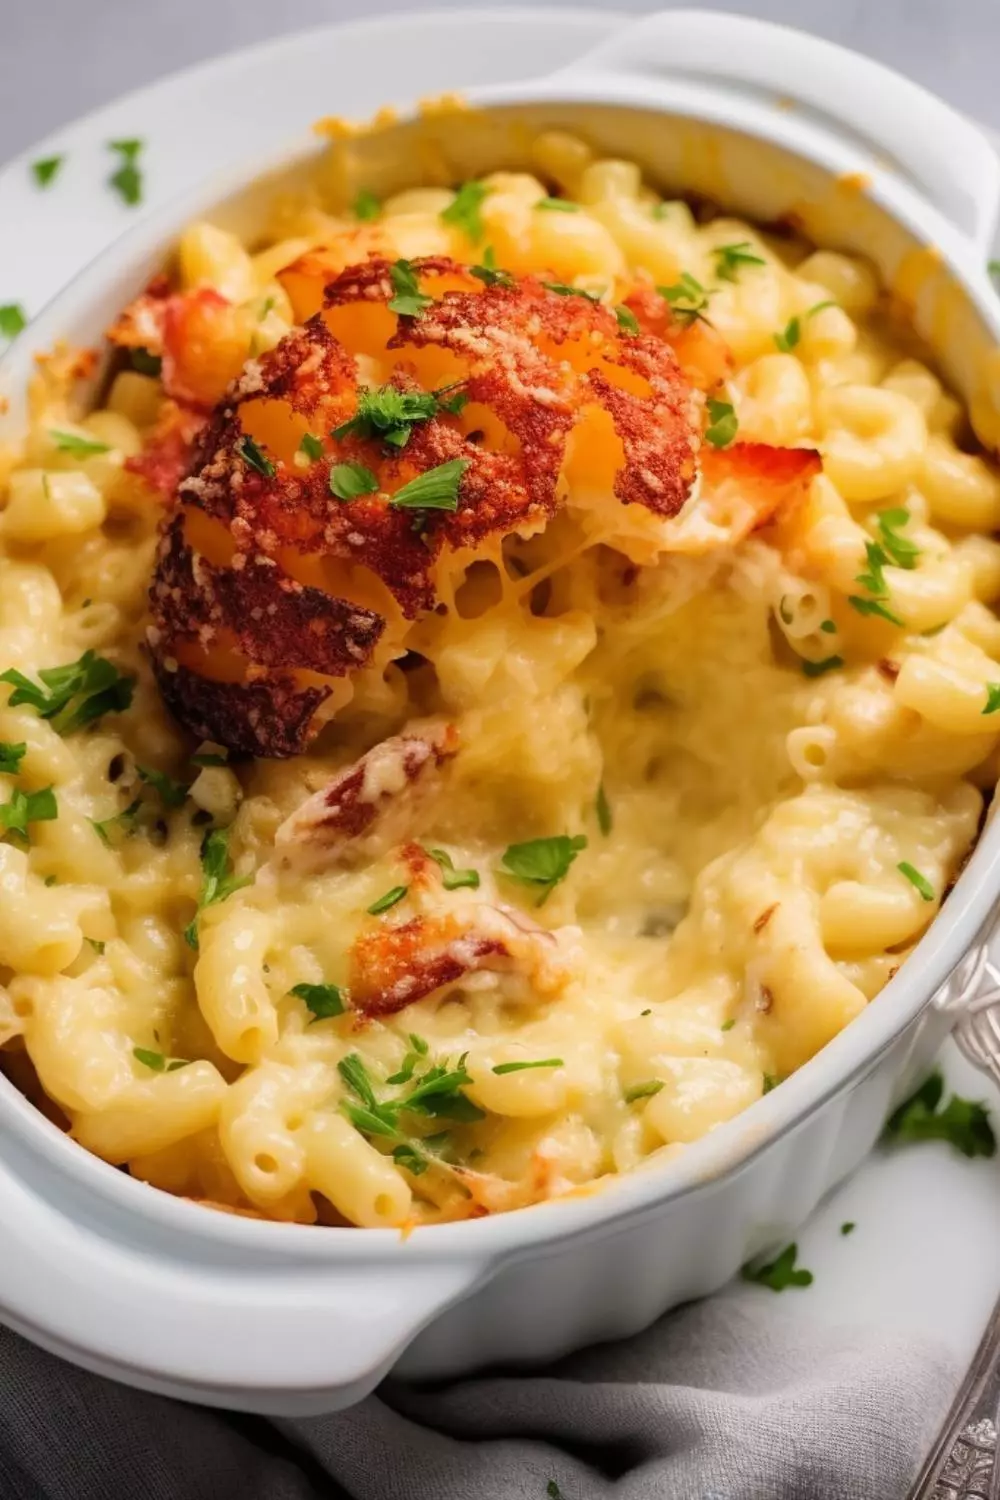 ruth's chris lobster mac and cheese